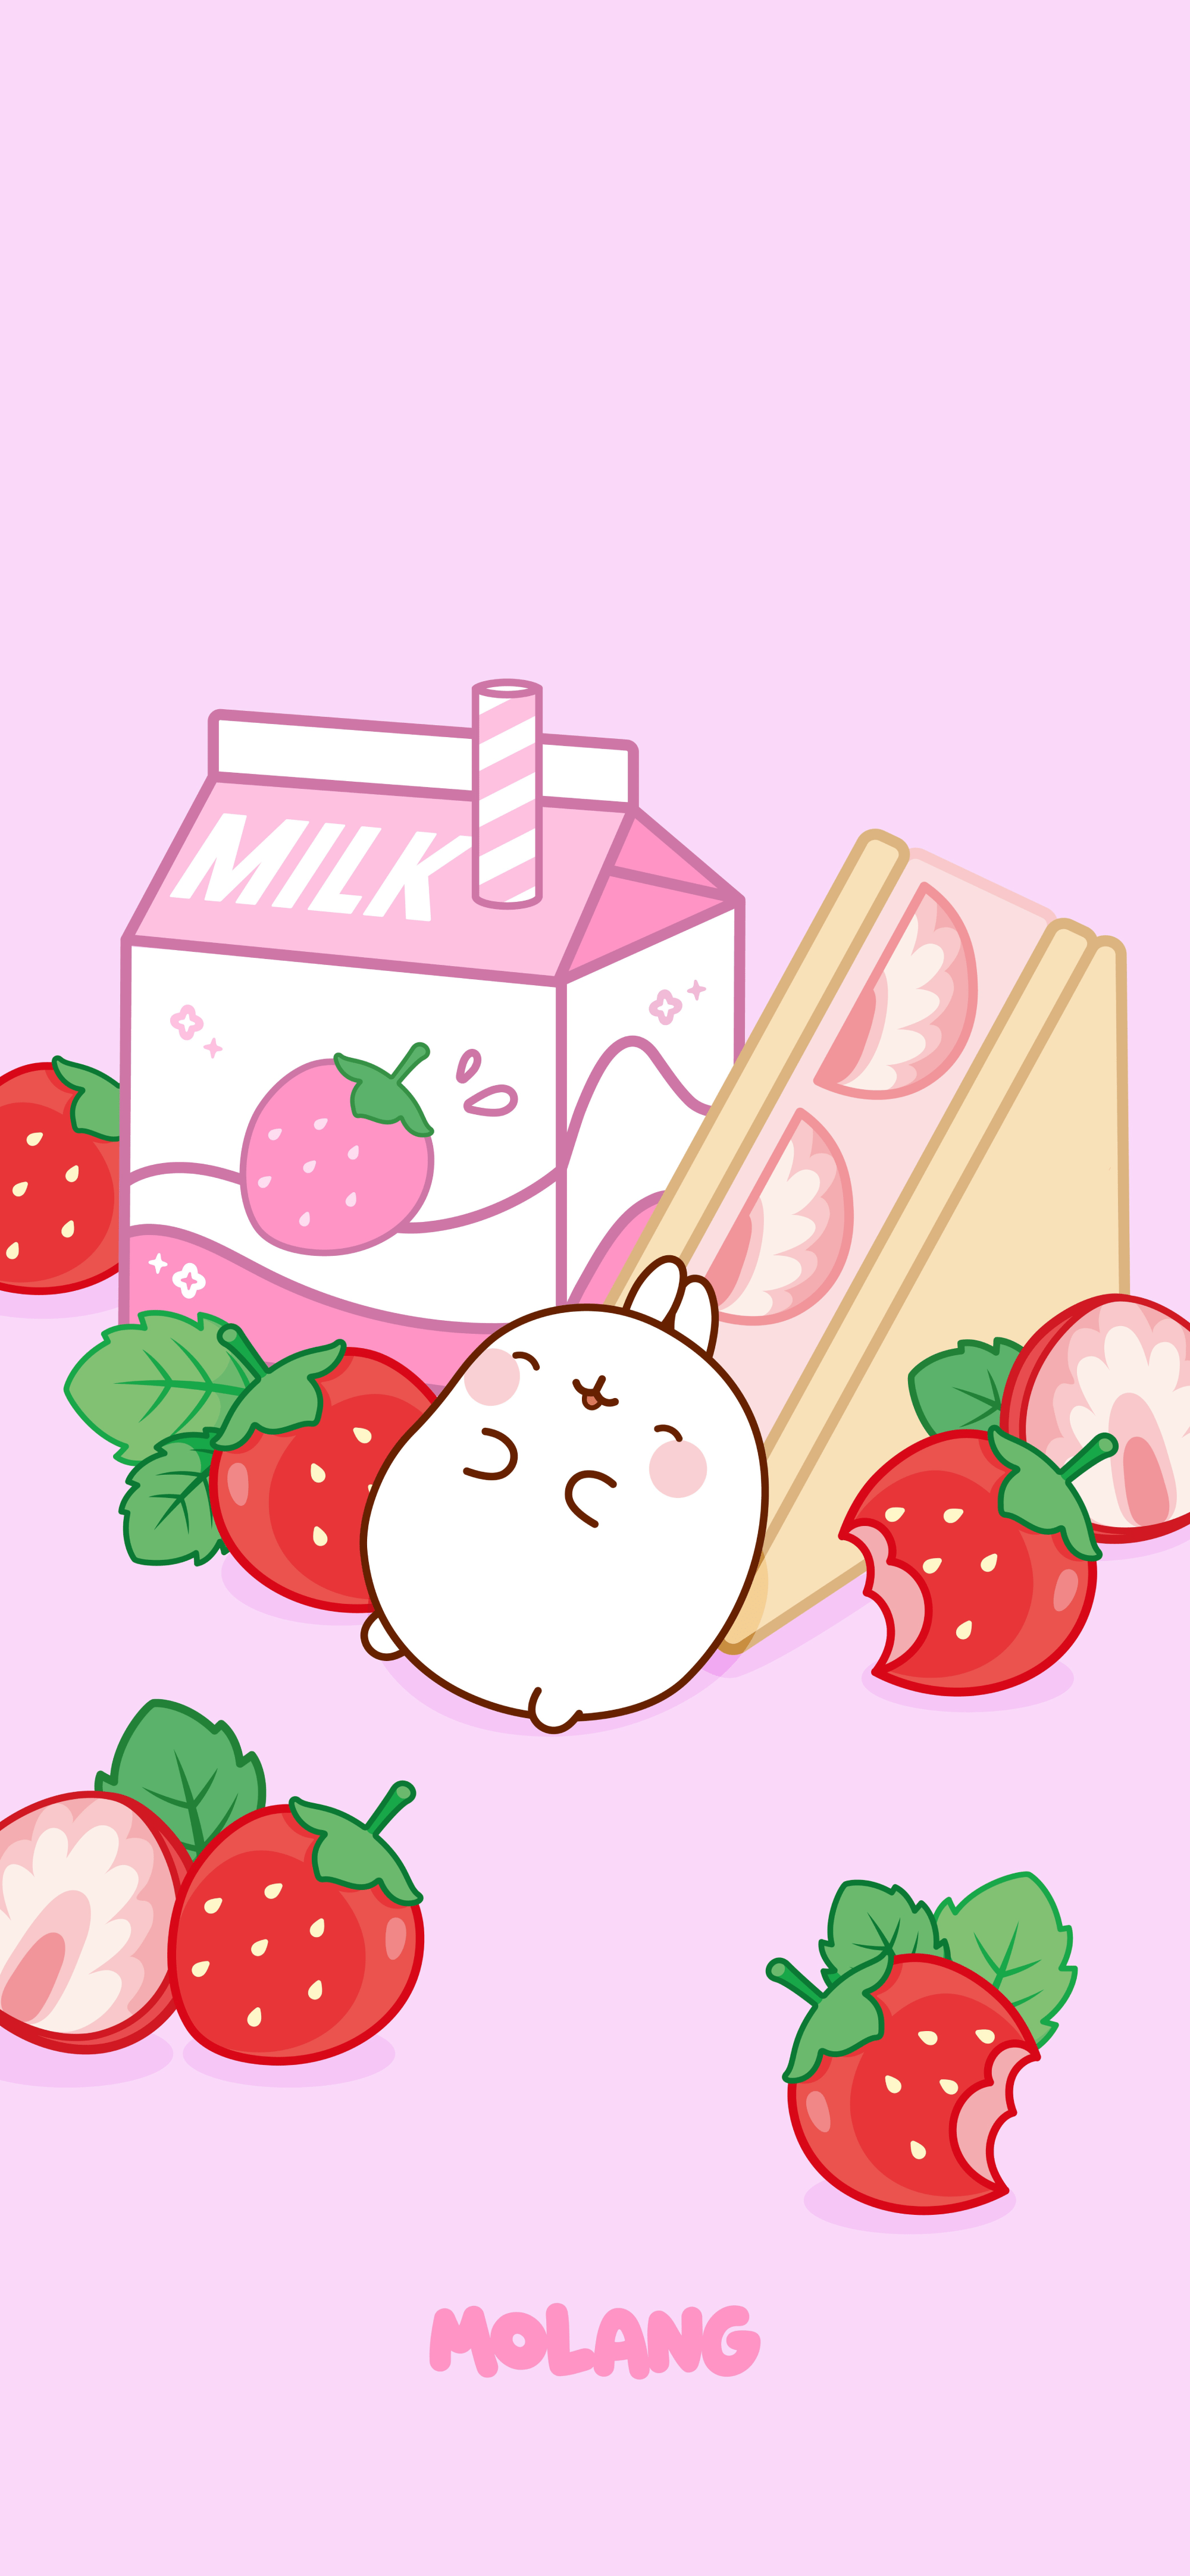 A molang rabbit with a strawberry milk and a strawberry sandwich - Molang